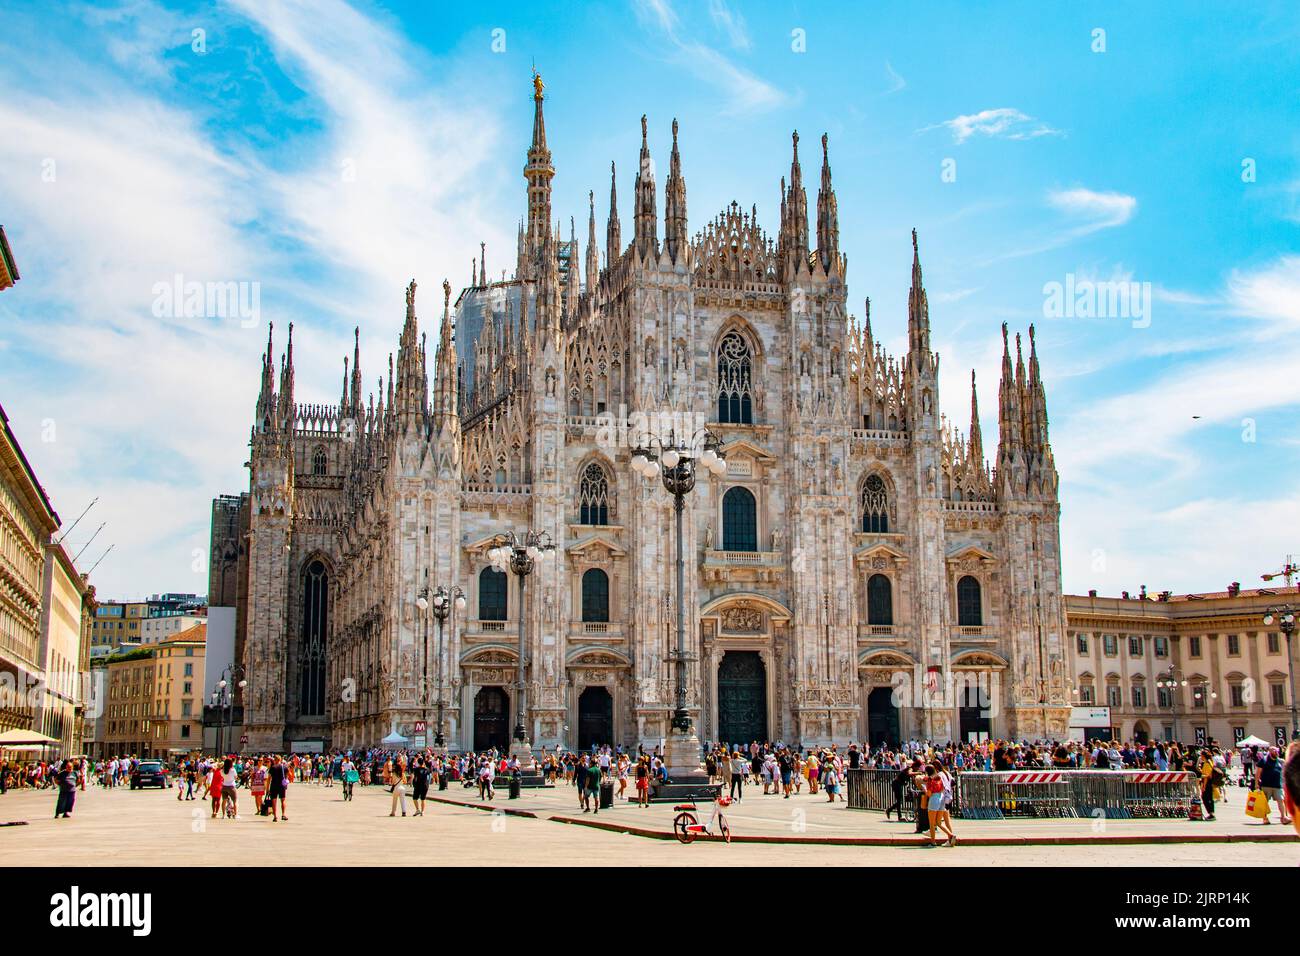 Beautiful architecture of Milan's Duomo Cathedral, an ornate marble roman catholic church, in north Italy Stock Photo